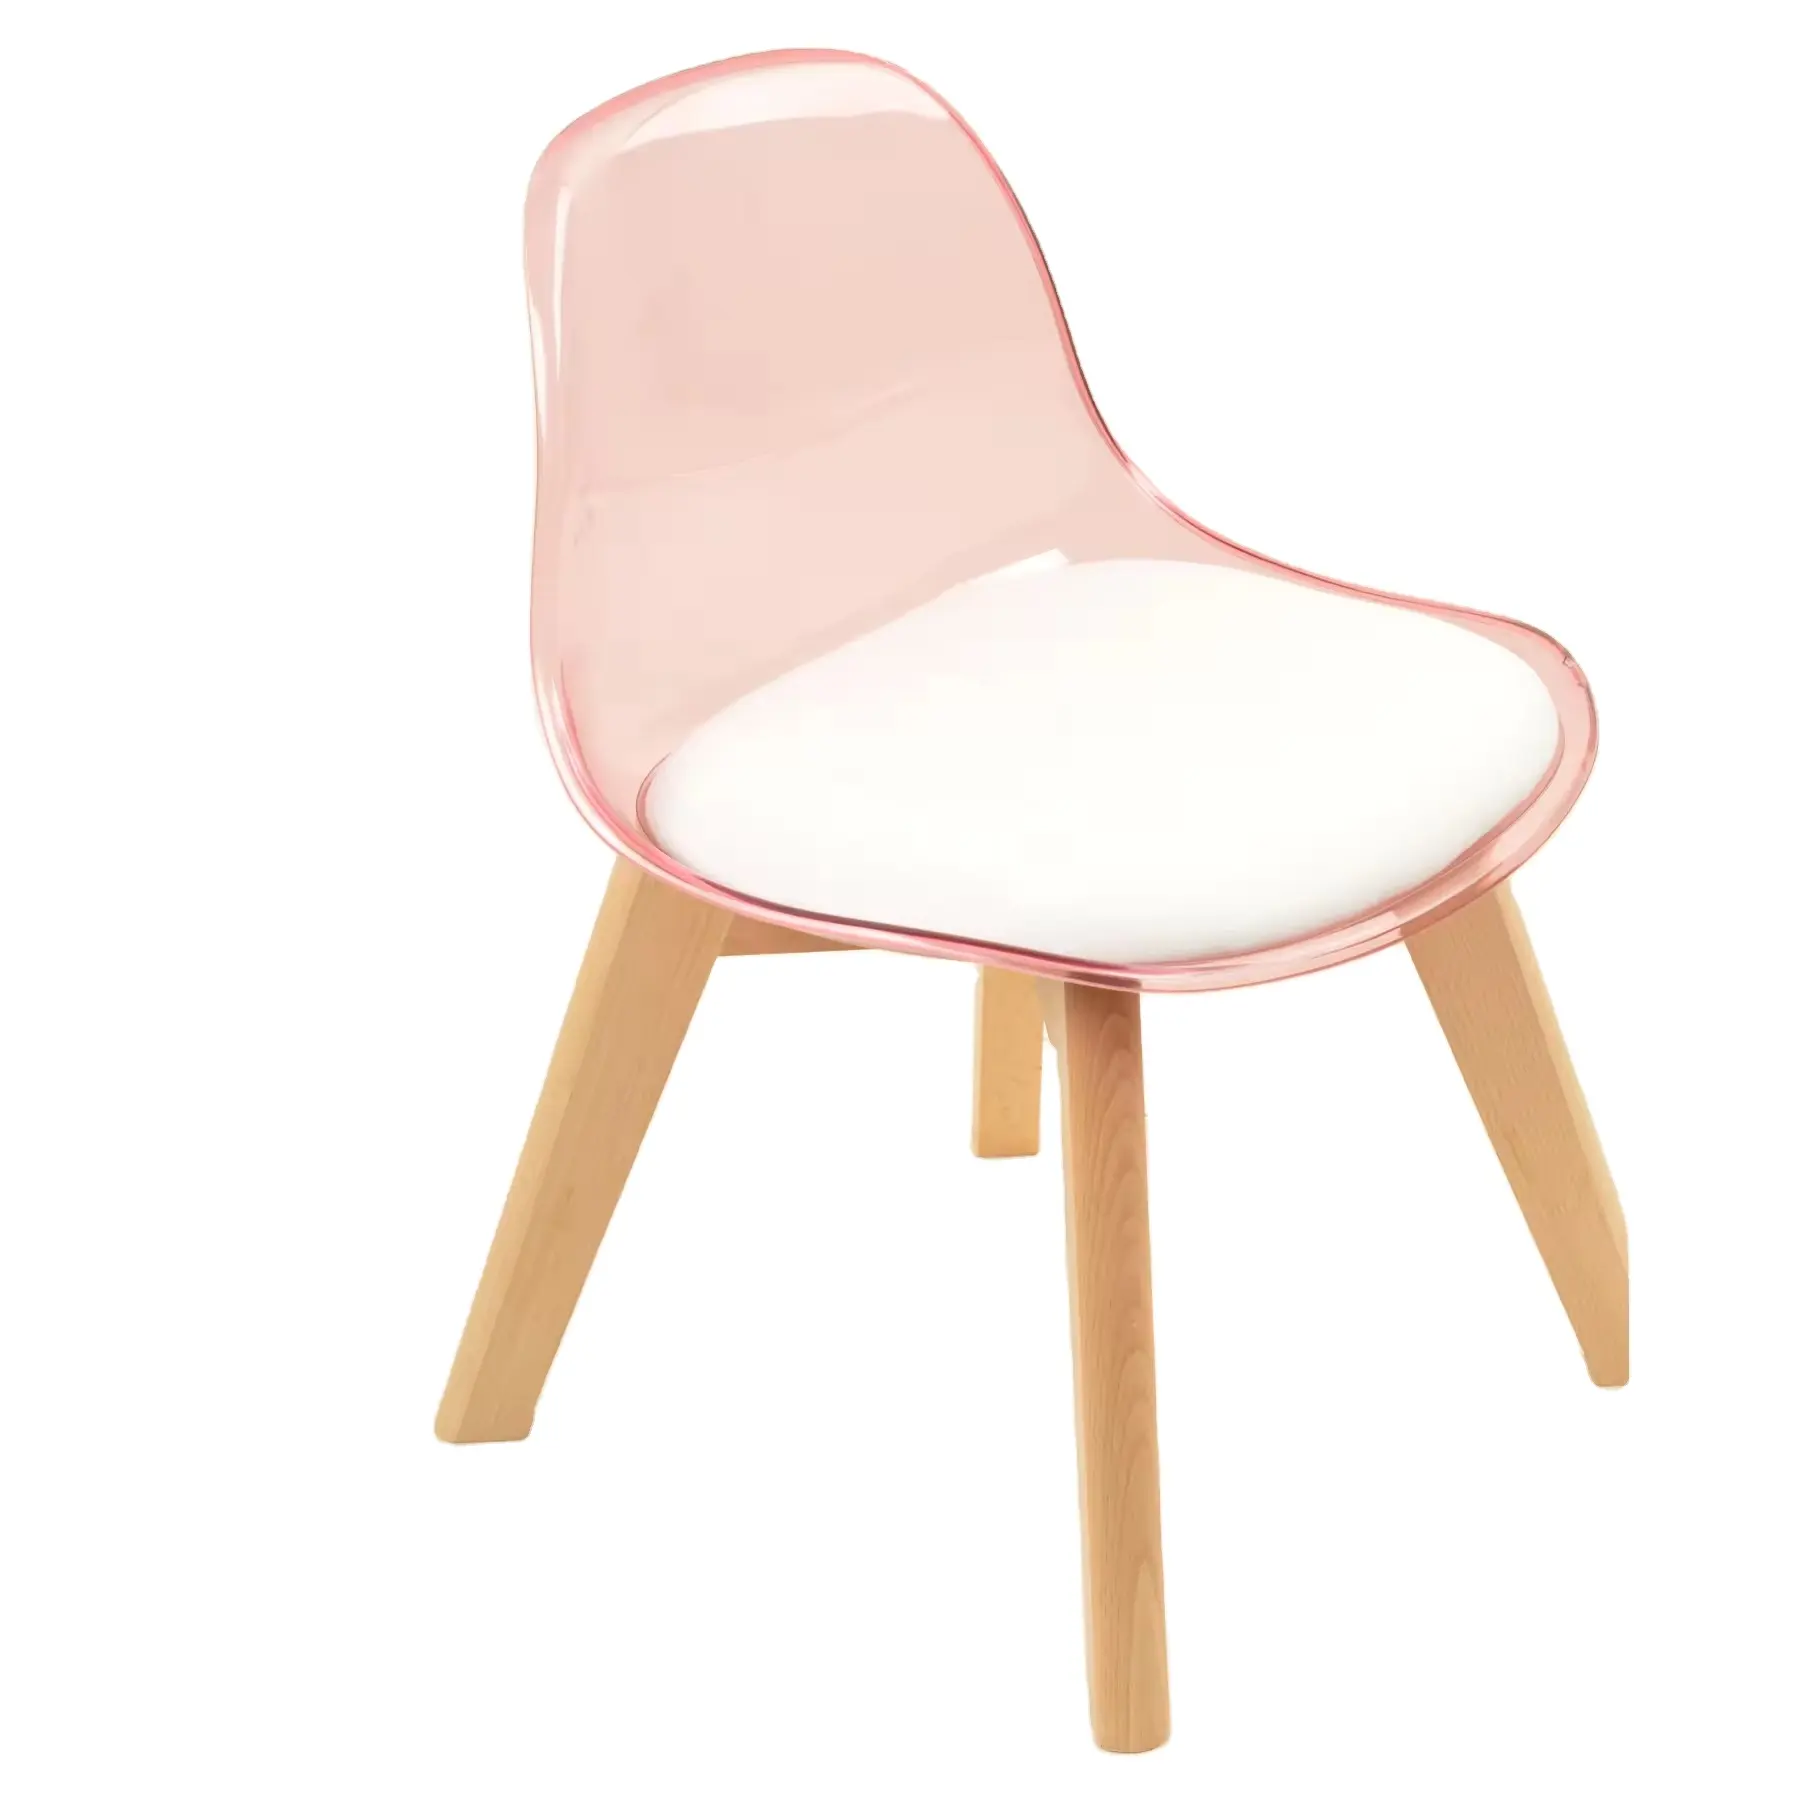 Stackable plastic chairs modern colored pink dining room chairs cafe furniture plastic kids chairs outdoor